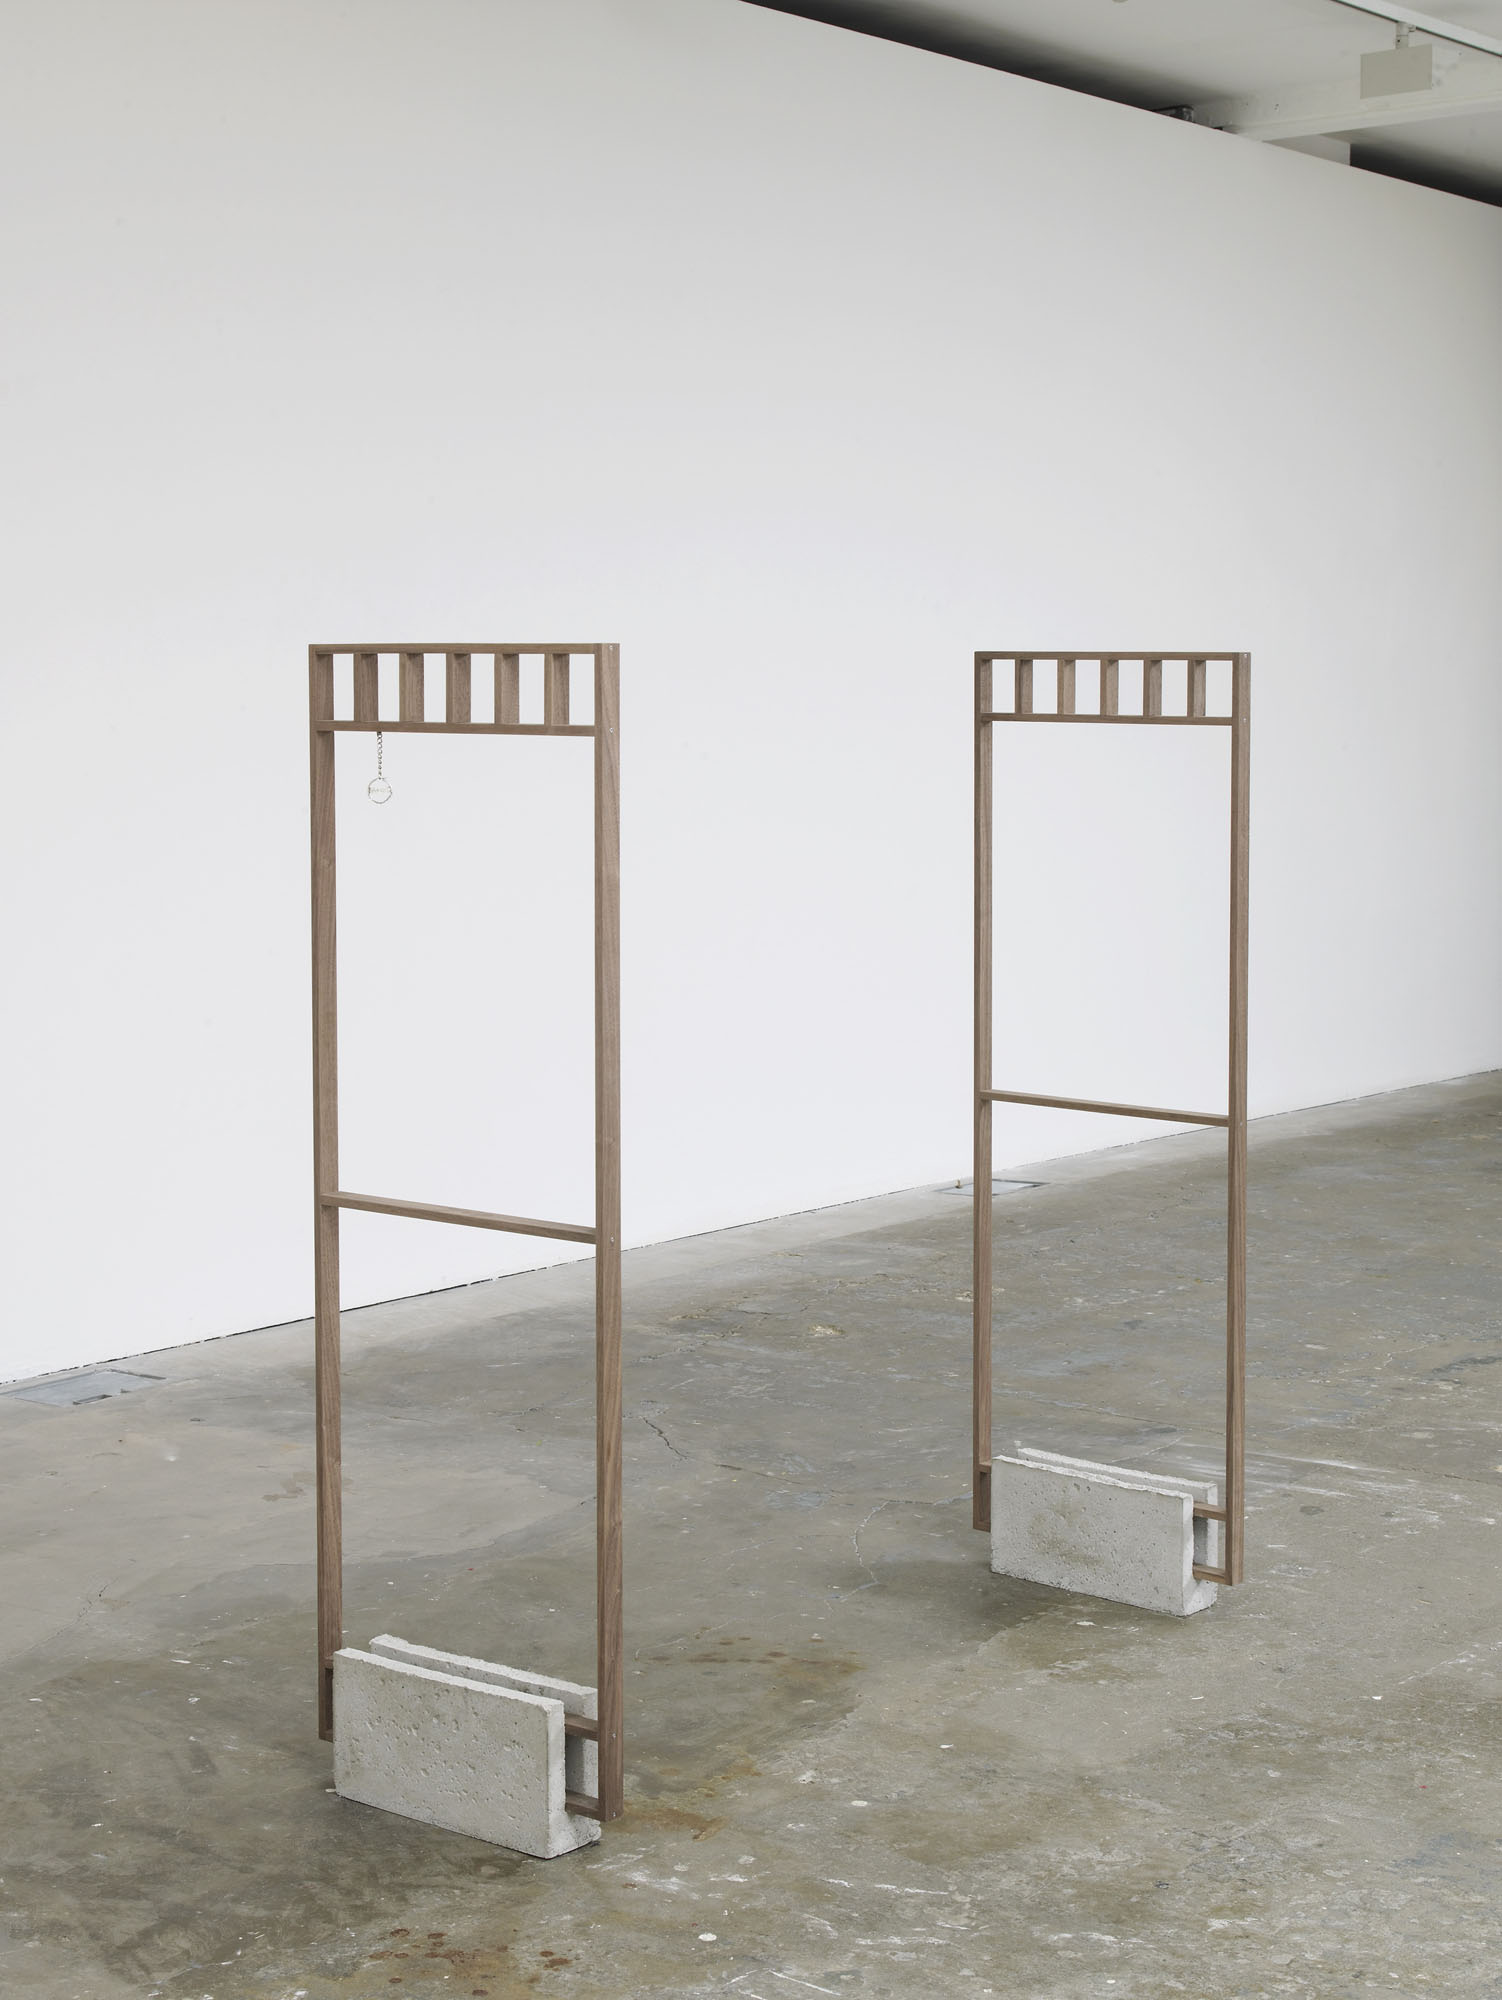 Whatever currency is hot right now, 2016
Walnut frame, cement plinth, engraved metal label, metal chain, earing (by PIETER)
140 x 46 x 9 cm
55 1/8 x 18 1/8 x 3 1/2 ins. 2
, Philipp Timischl